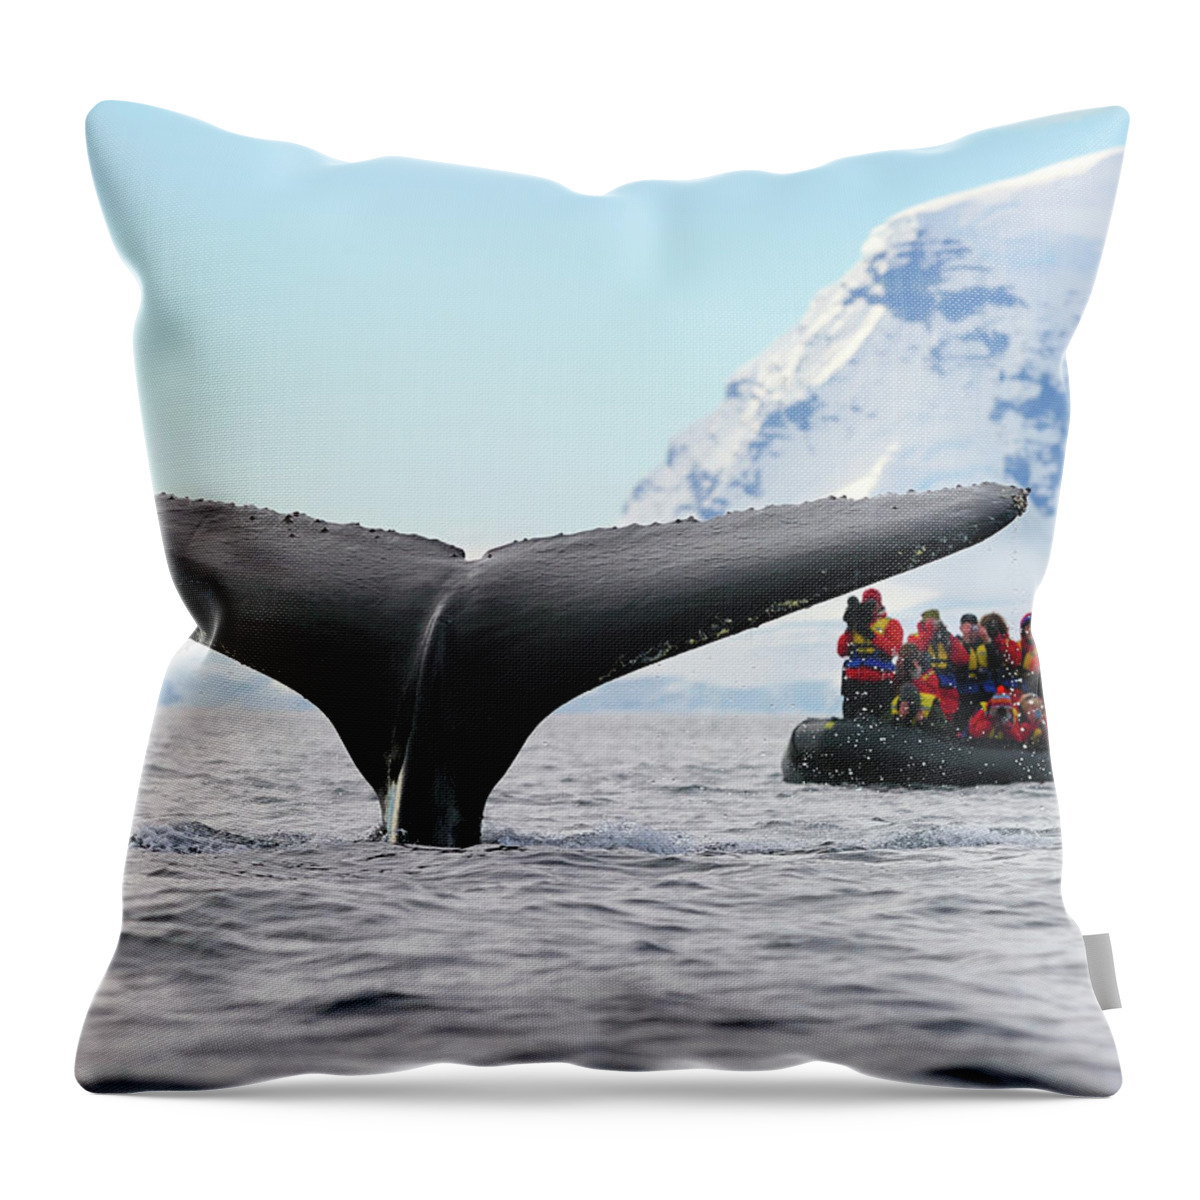 Humpback Whale (megaptera Novaeangliae) Throw Pillow featuring the photograph Humpback Whale Fluke by Tony Beck